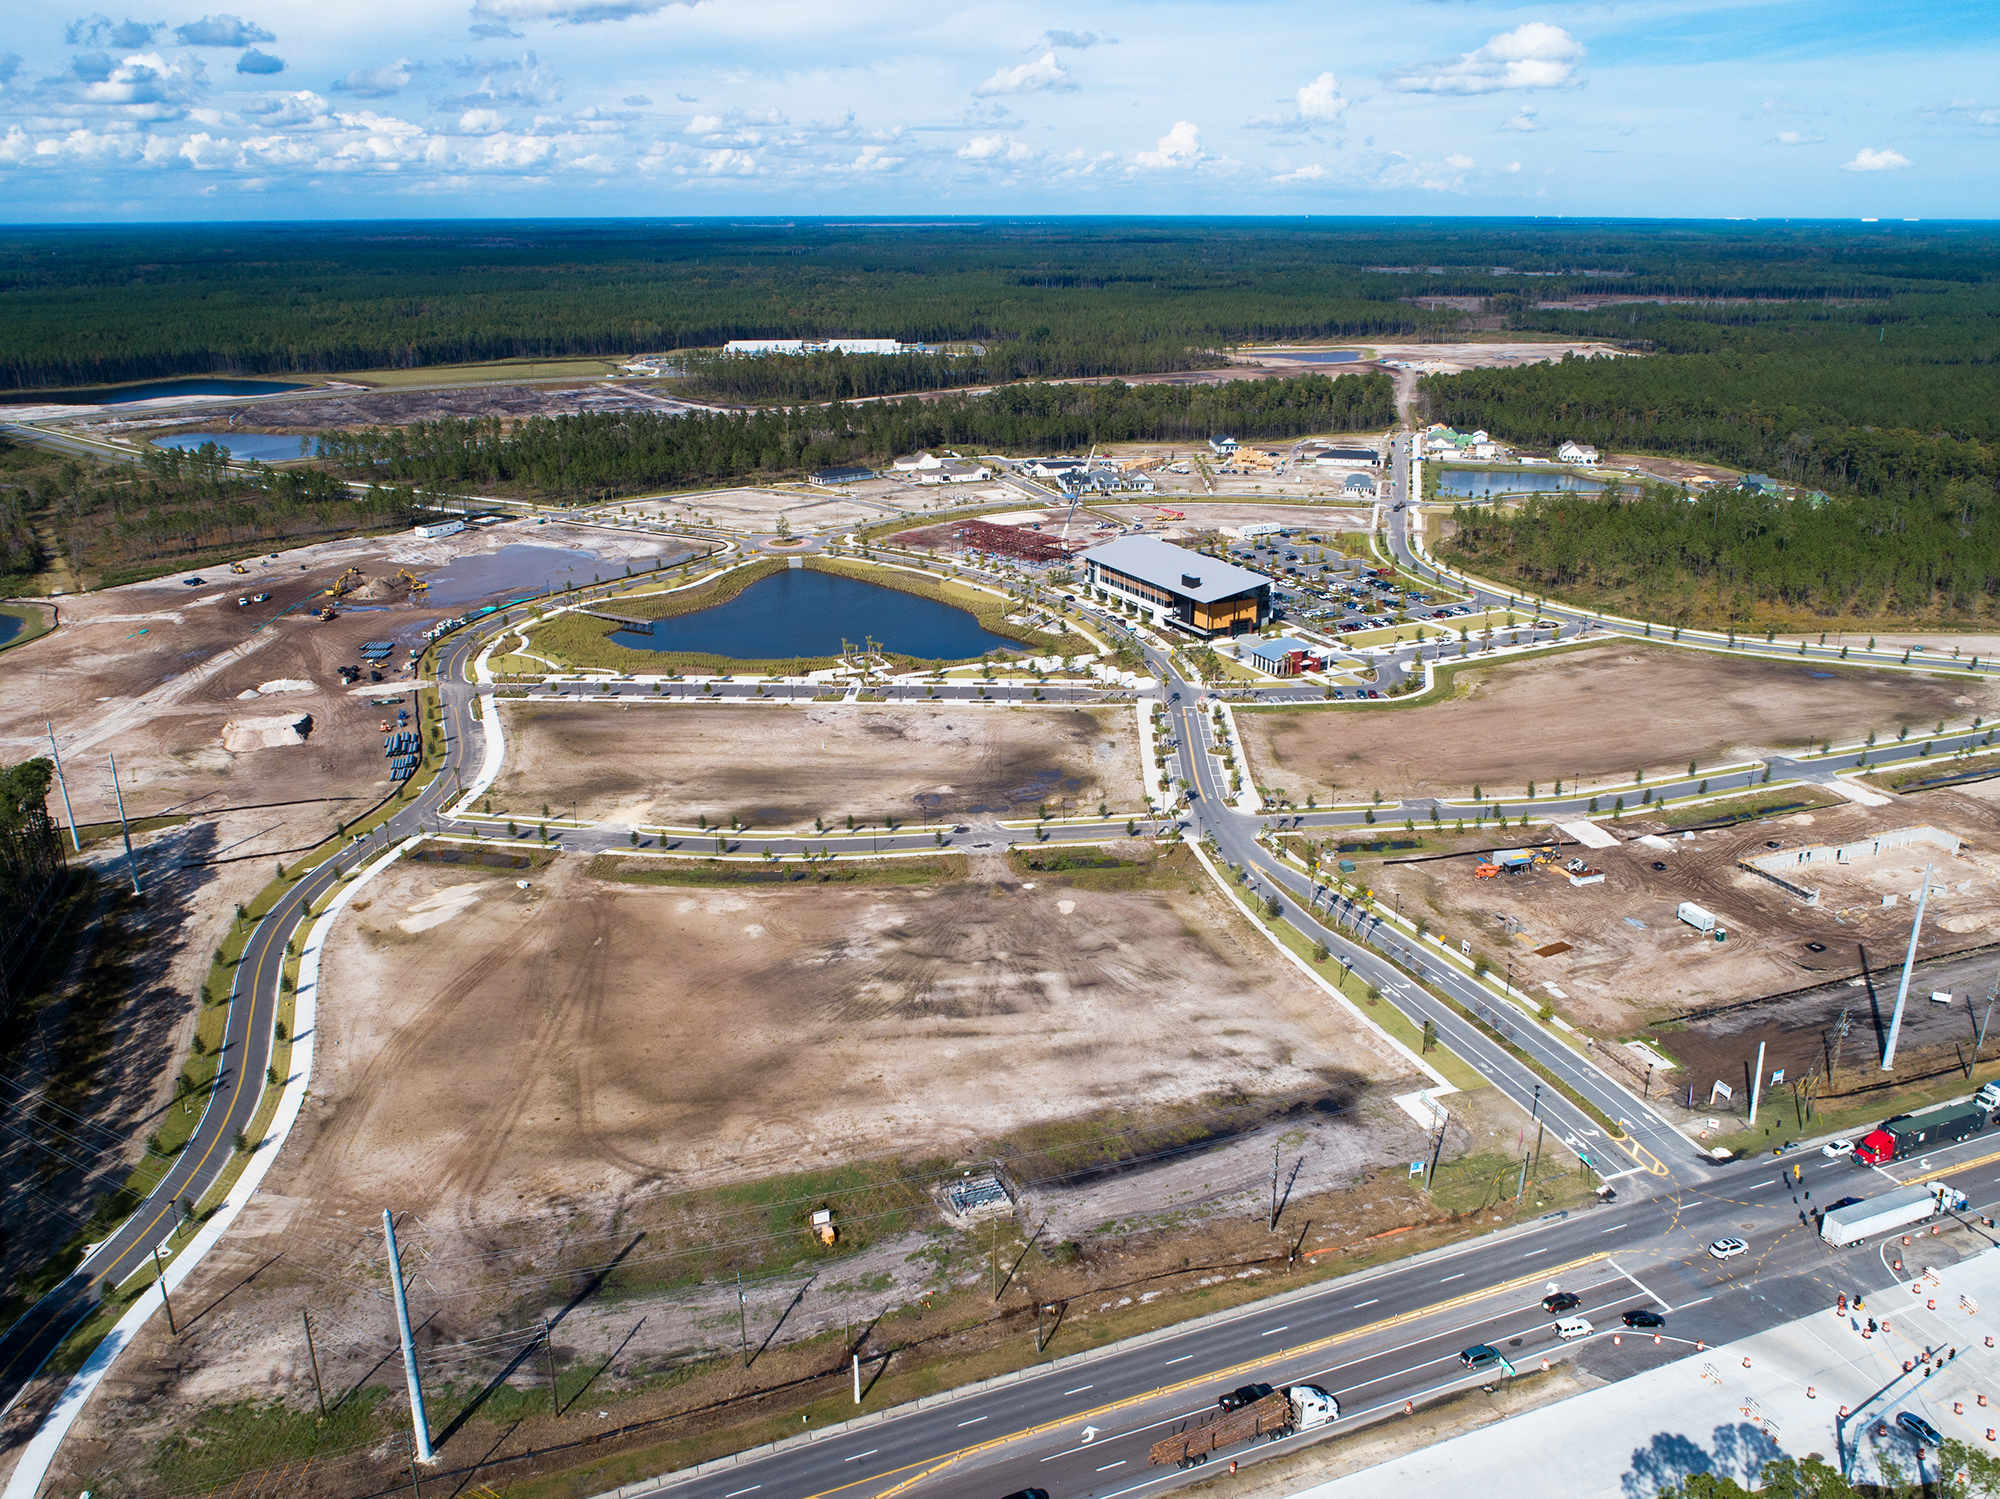 Wildlight, a master-planned community In Yulee, is being developed on 24,000 acres of Rayonier Inc. timberland from Florida A1A north to the St. Marys River. A1A runs along the lower part of the image.